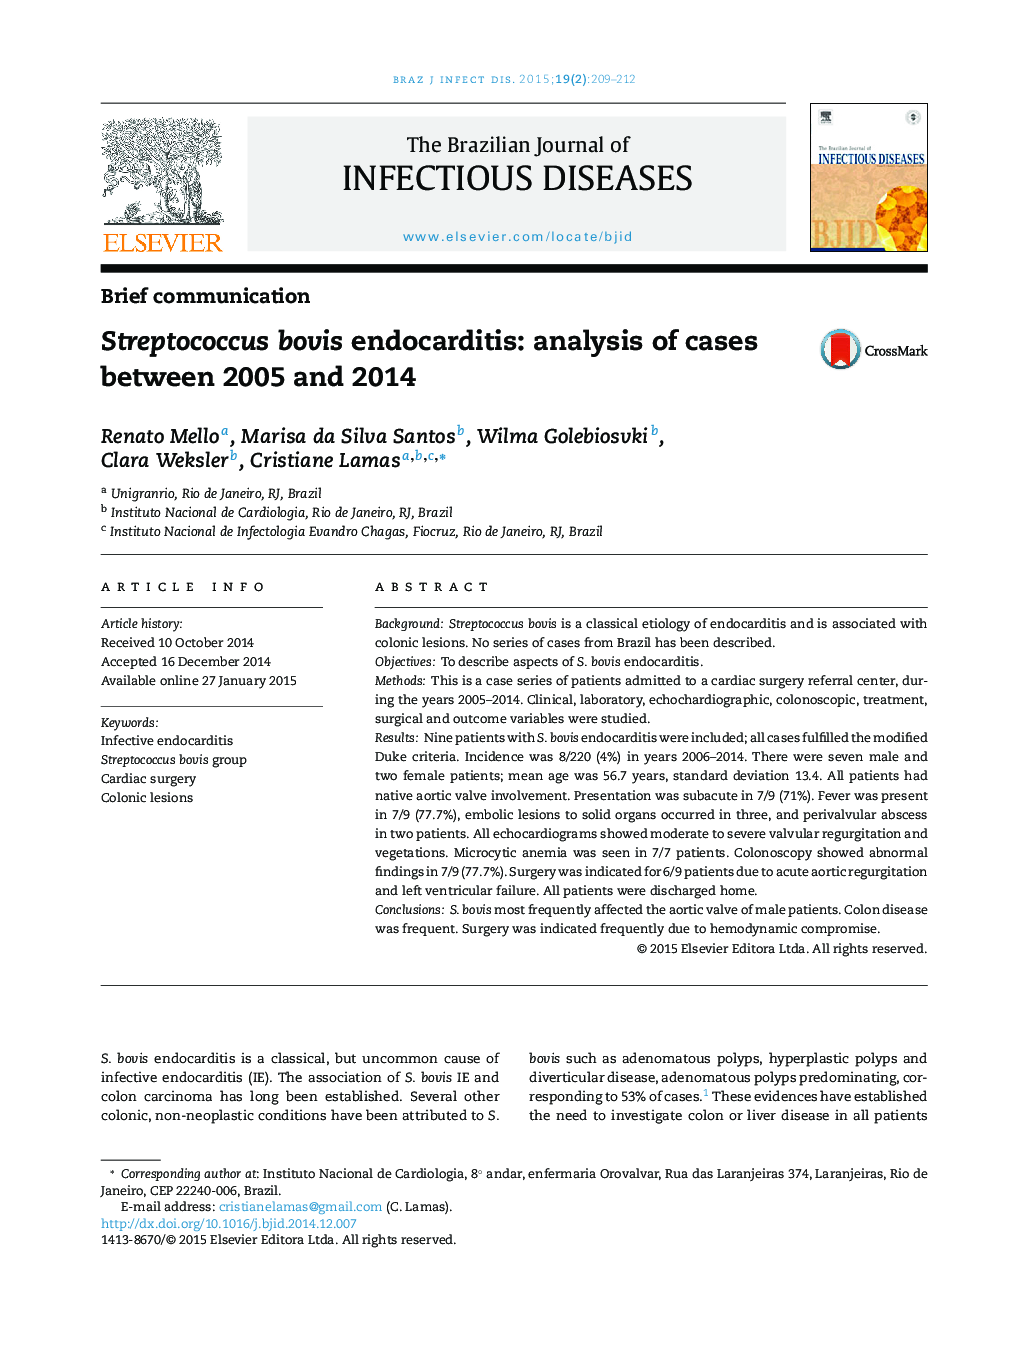 Streptococcus bovis endocarditis: analysis of cases between 2005 and 2014